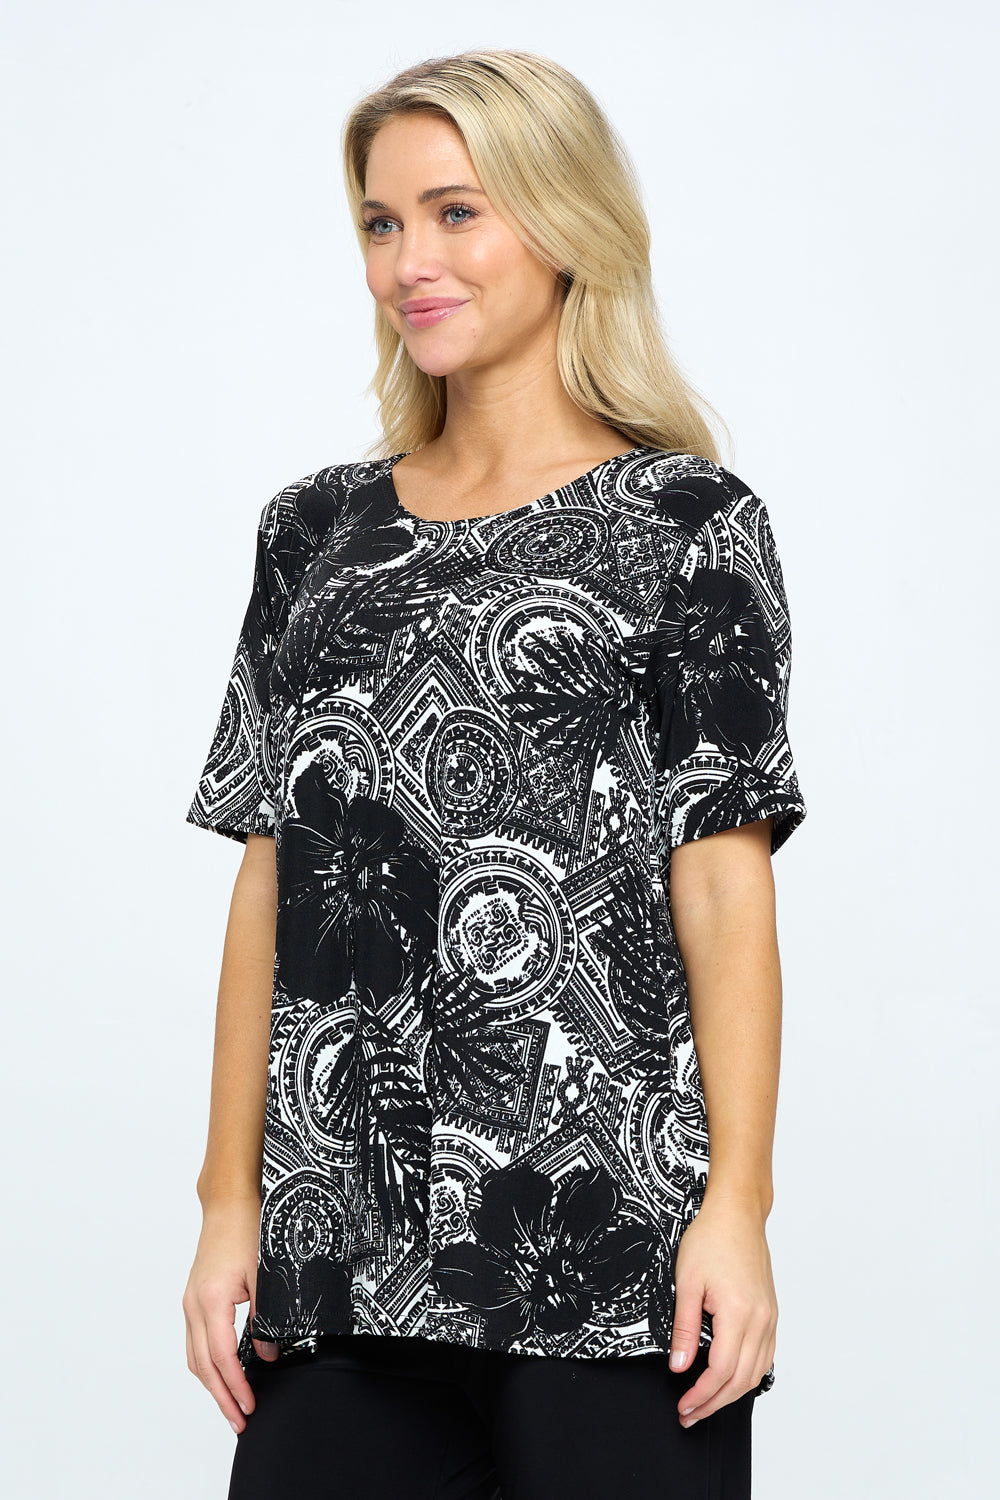 Stretchy Vented Top Short Sleeve Printed, 2042BN-SRP1-W325